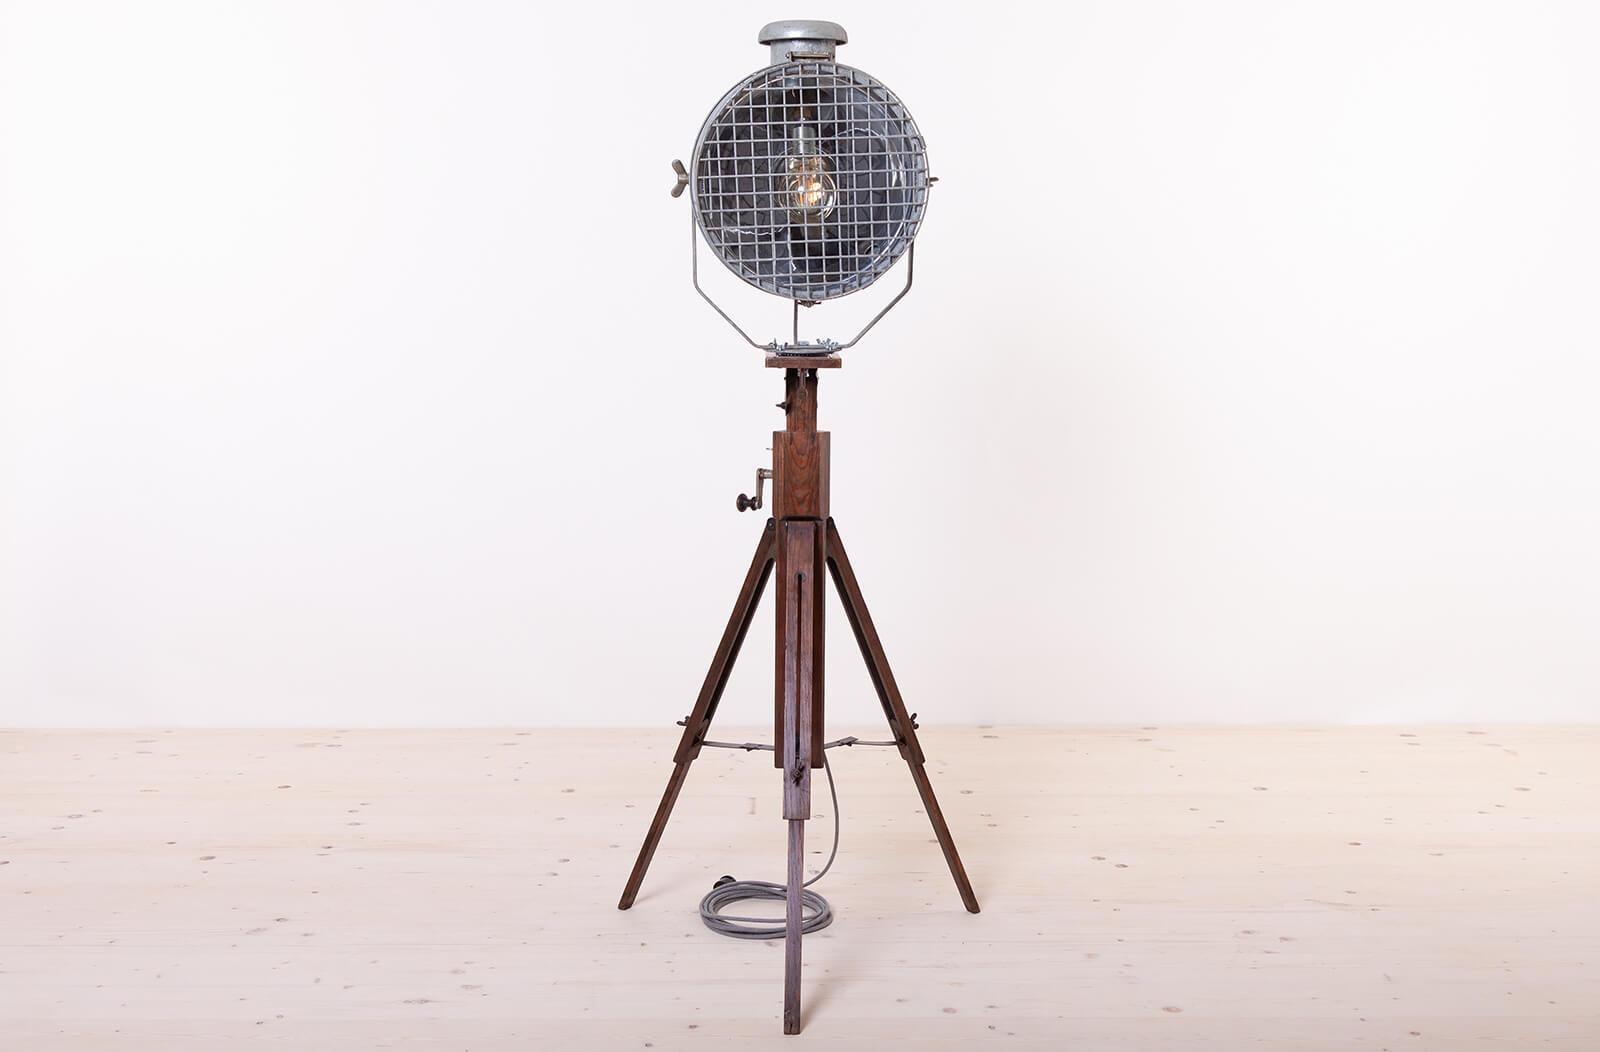 Discover a piece of history with this rare antique TILLEY Gas Floodlight with original marking - Model BT 25A.
Crafted with attention to detail, the wooden base (made of old camera tripod) has been meticulously cleaned and treated with oil,